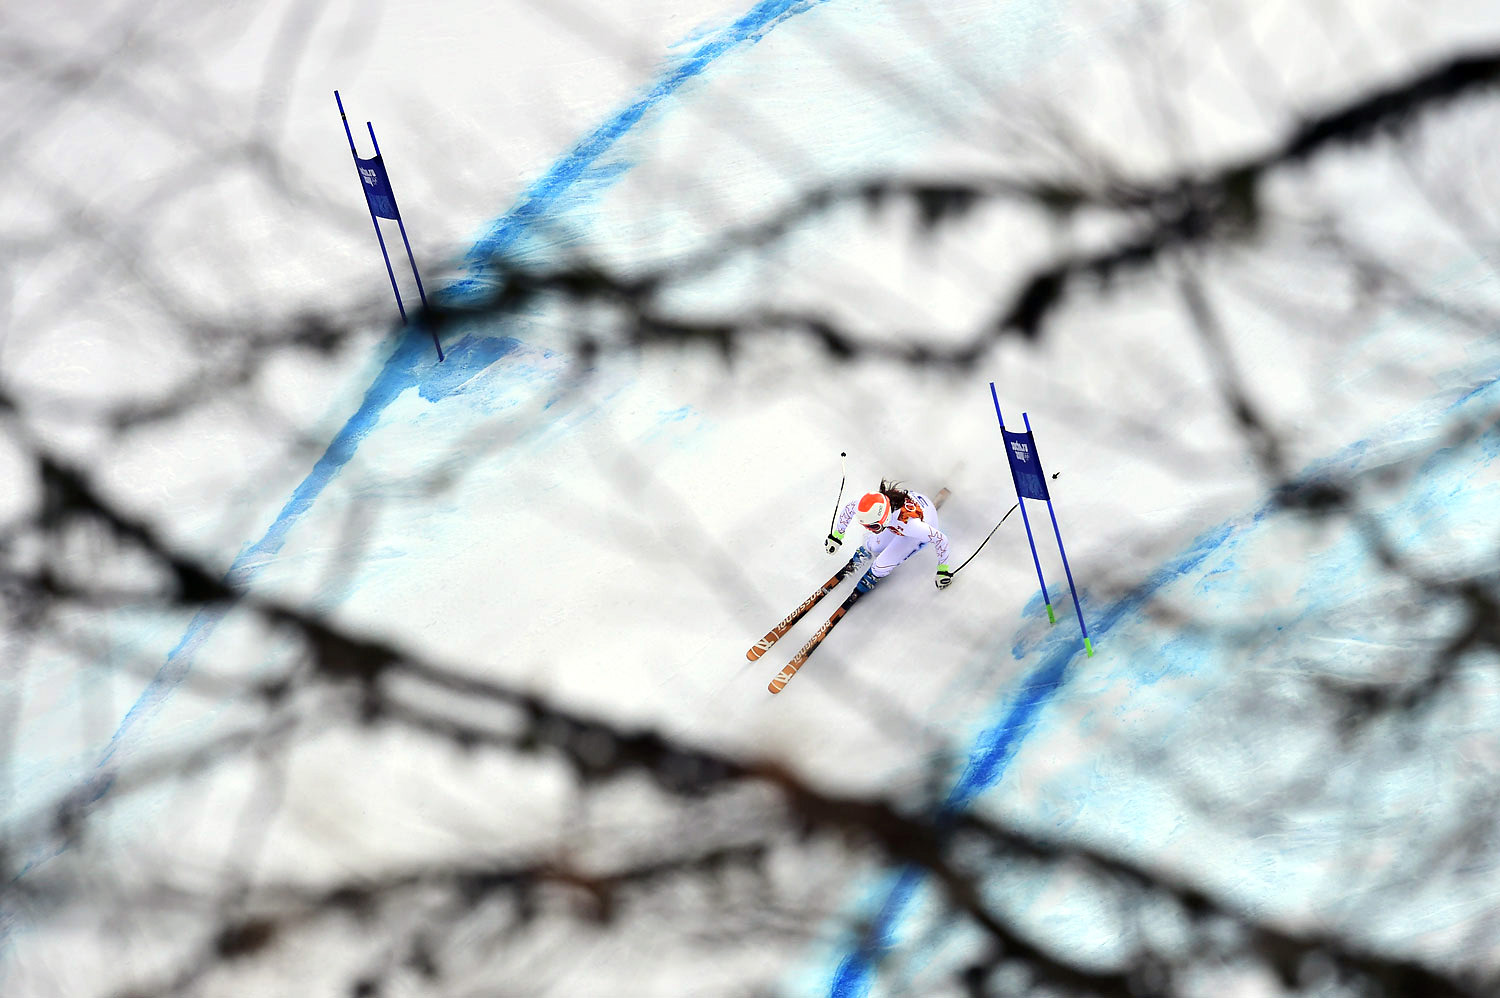 U.S. skier Leanne Smith competes during the Women's Alpine Skiing Super Combined Downhill at the Rosa Khutor Alpine Center.